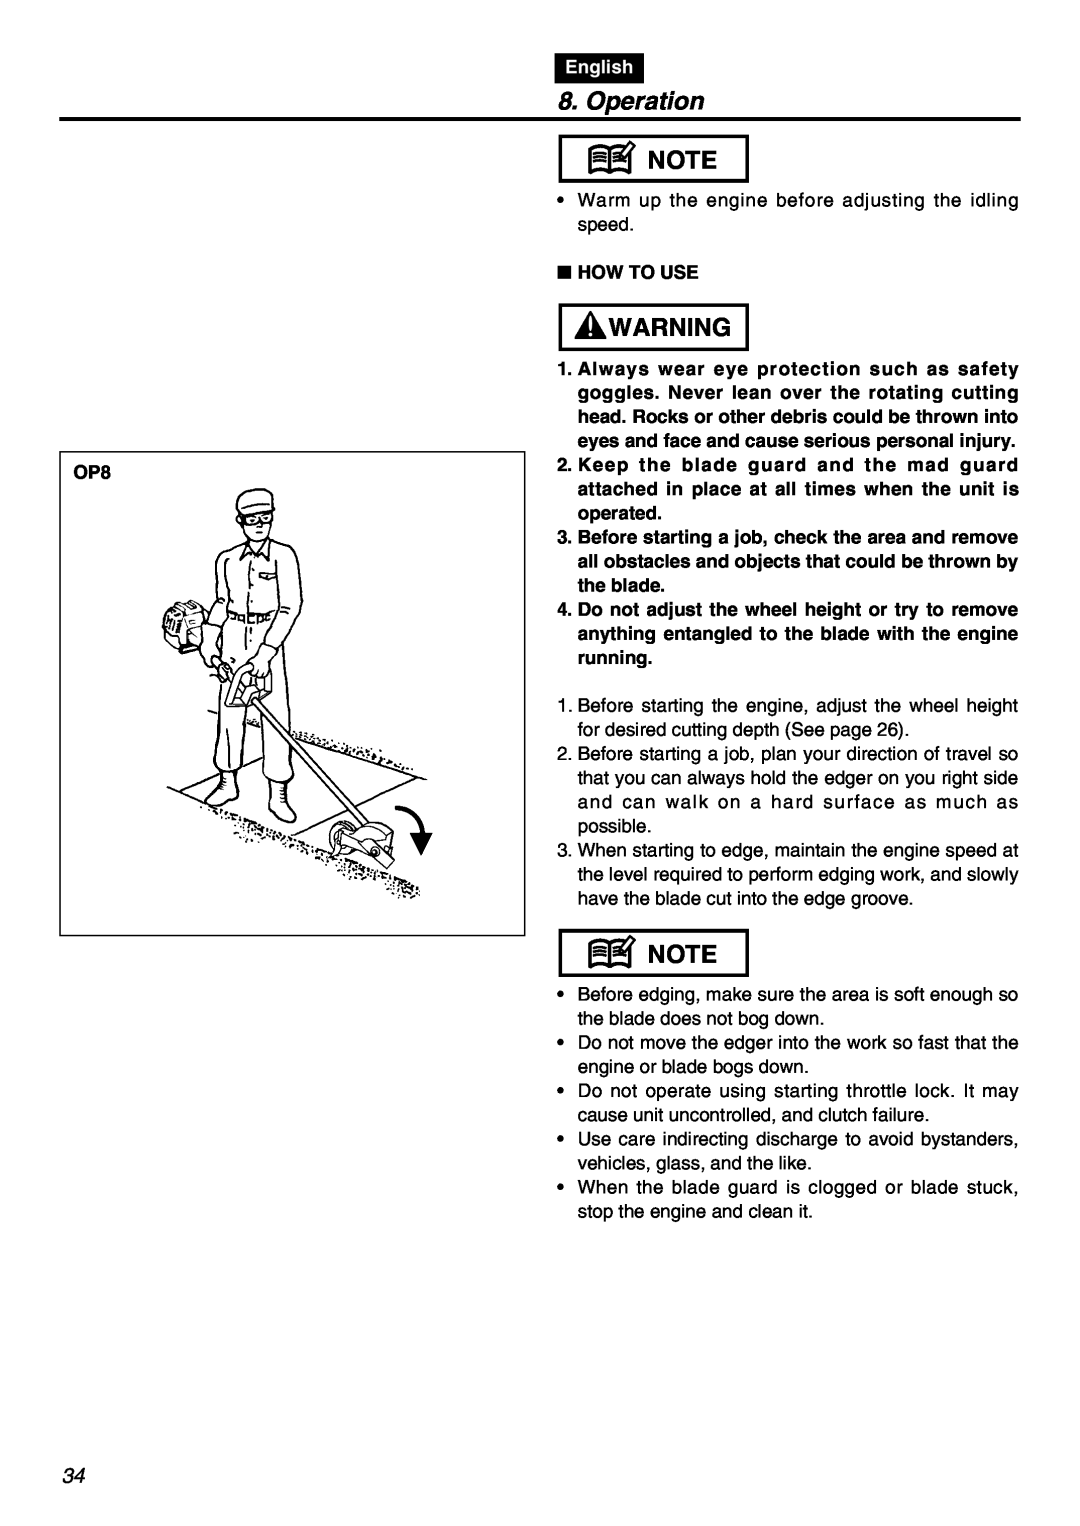 RedMax HEZ2602S, HEZ3001S, HEZ2401S manual Operation, English, How To Use 